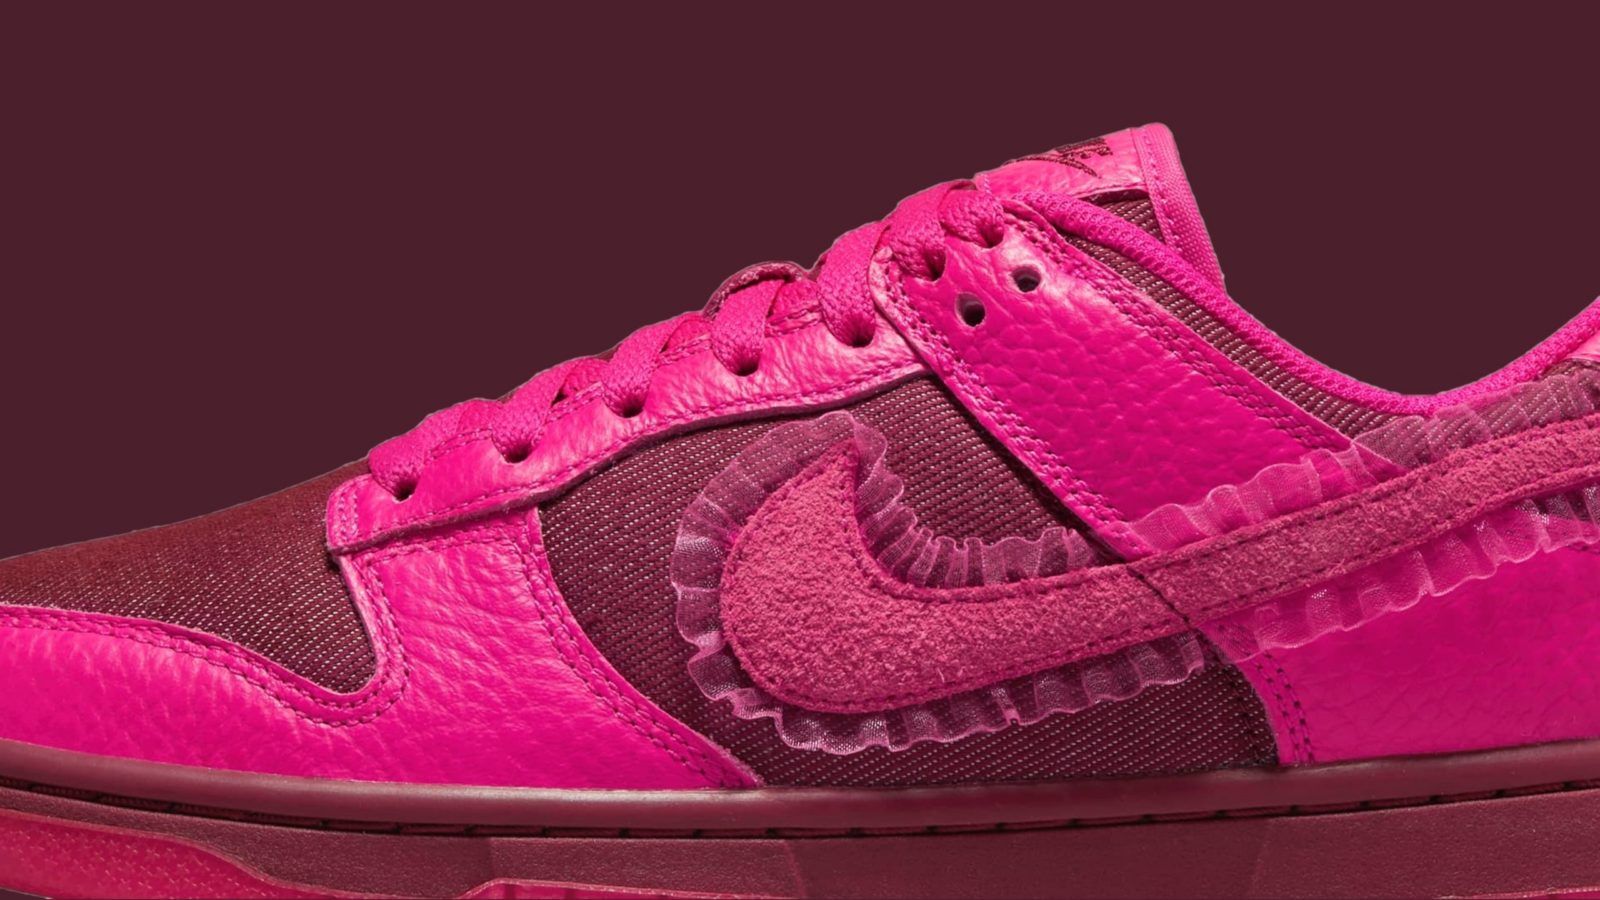 For Sole Mates: 6 love-themed sneakers to gift this Valentine’s Day